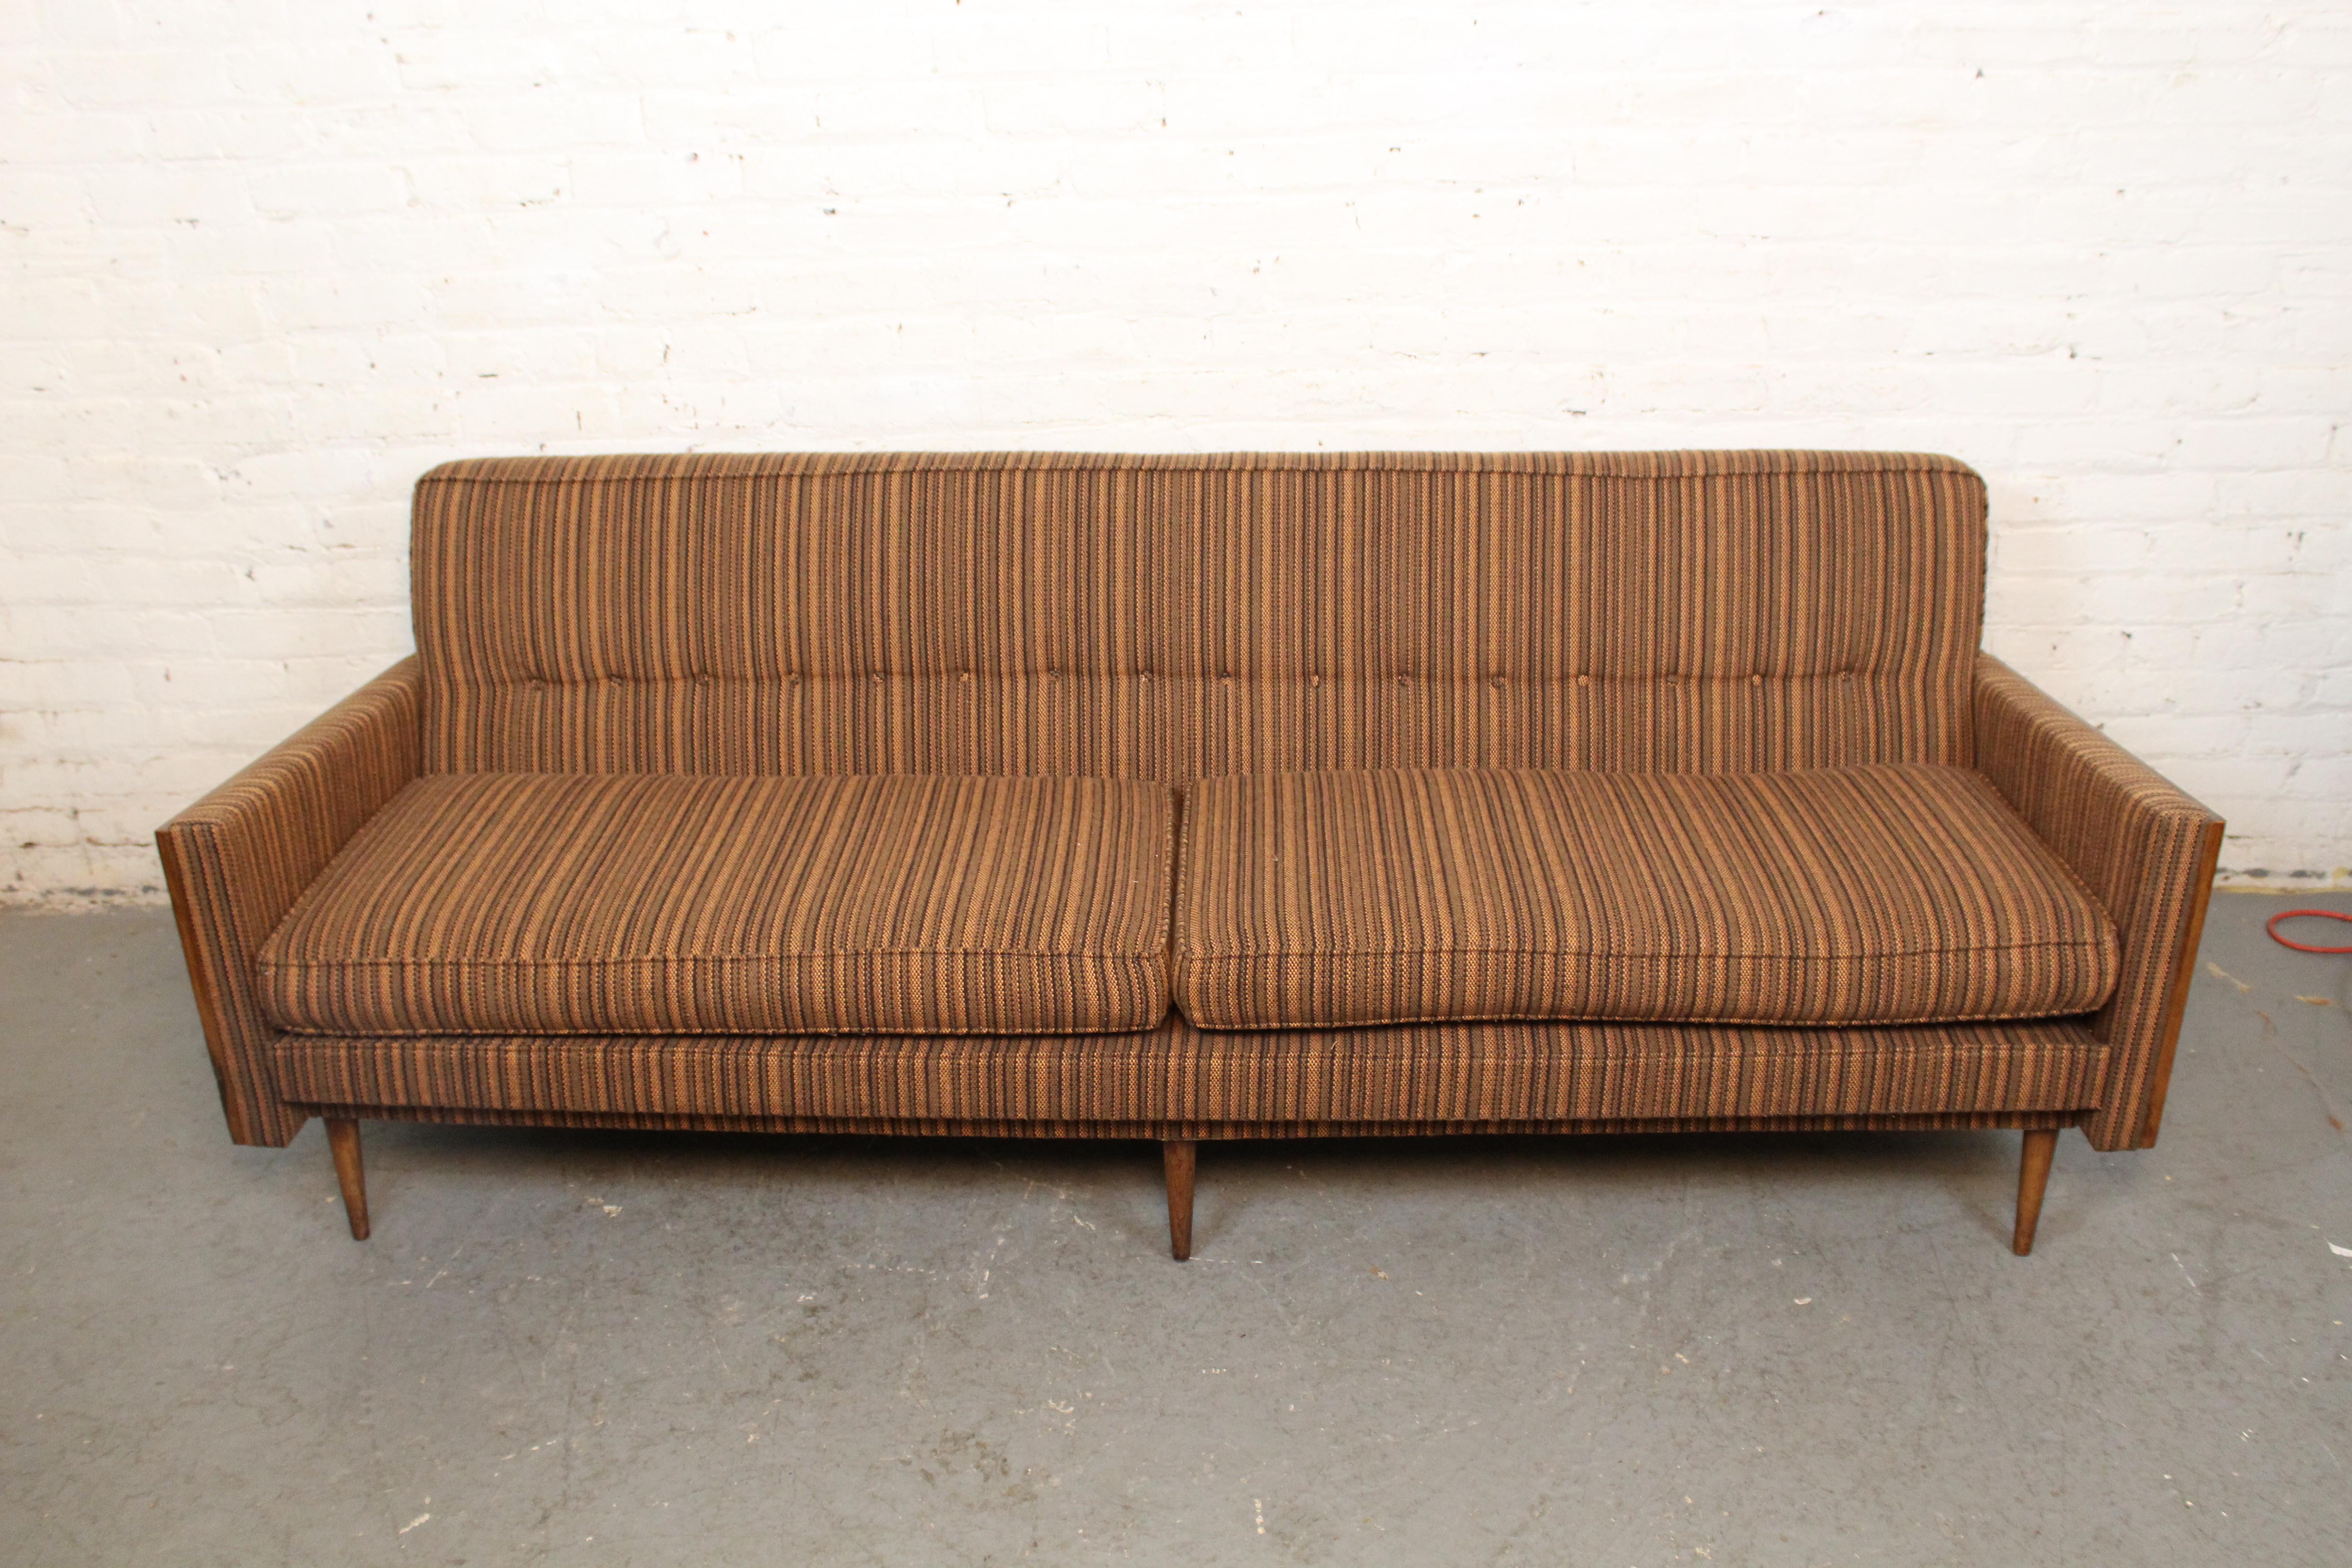 Send your living room back in time with this fantastic mid-century sofa! Sporting funky atomic-age aesthetics, this cozy piece is highlighted by tufted striped tweed upholstery, a sharp angular silhouette, and gorgeous woven rattan armrests. Heavily